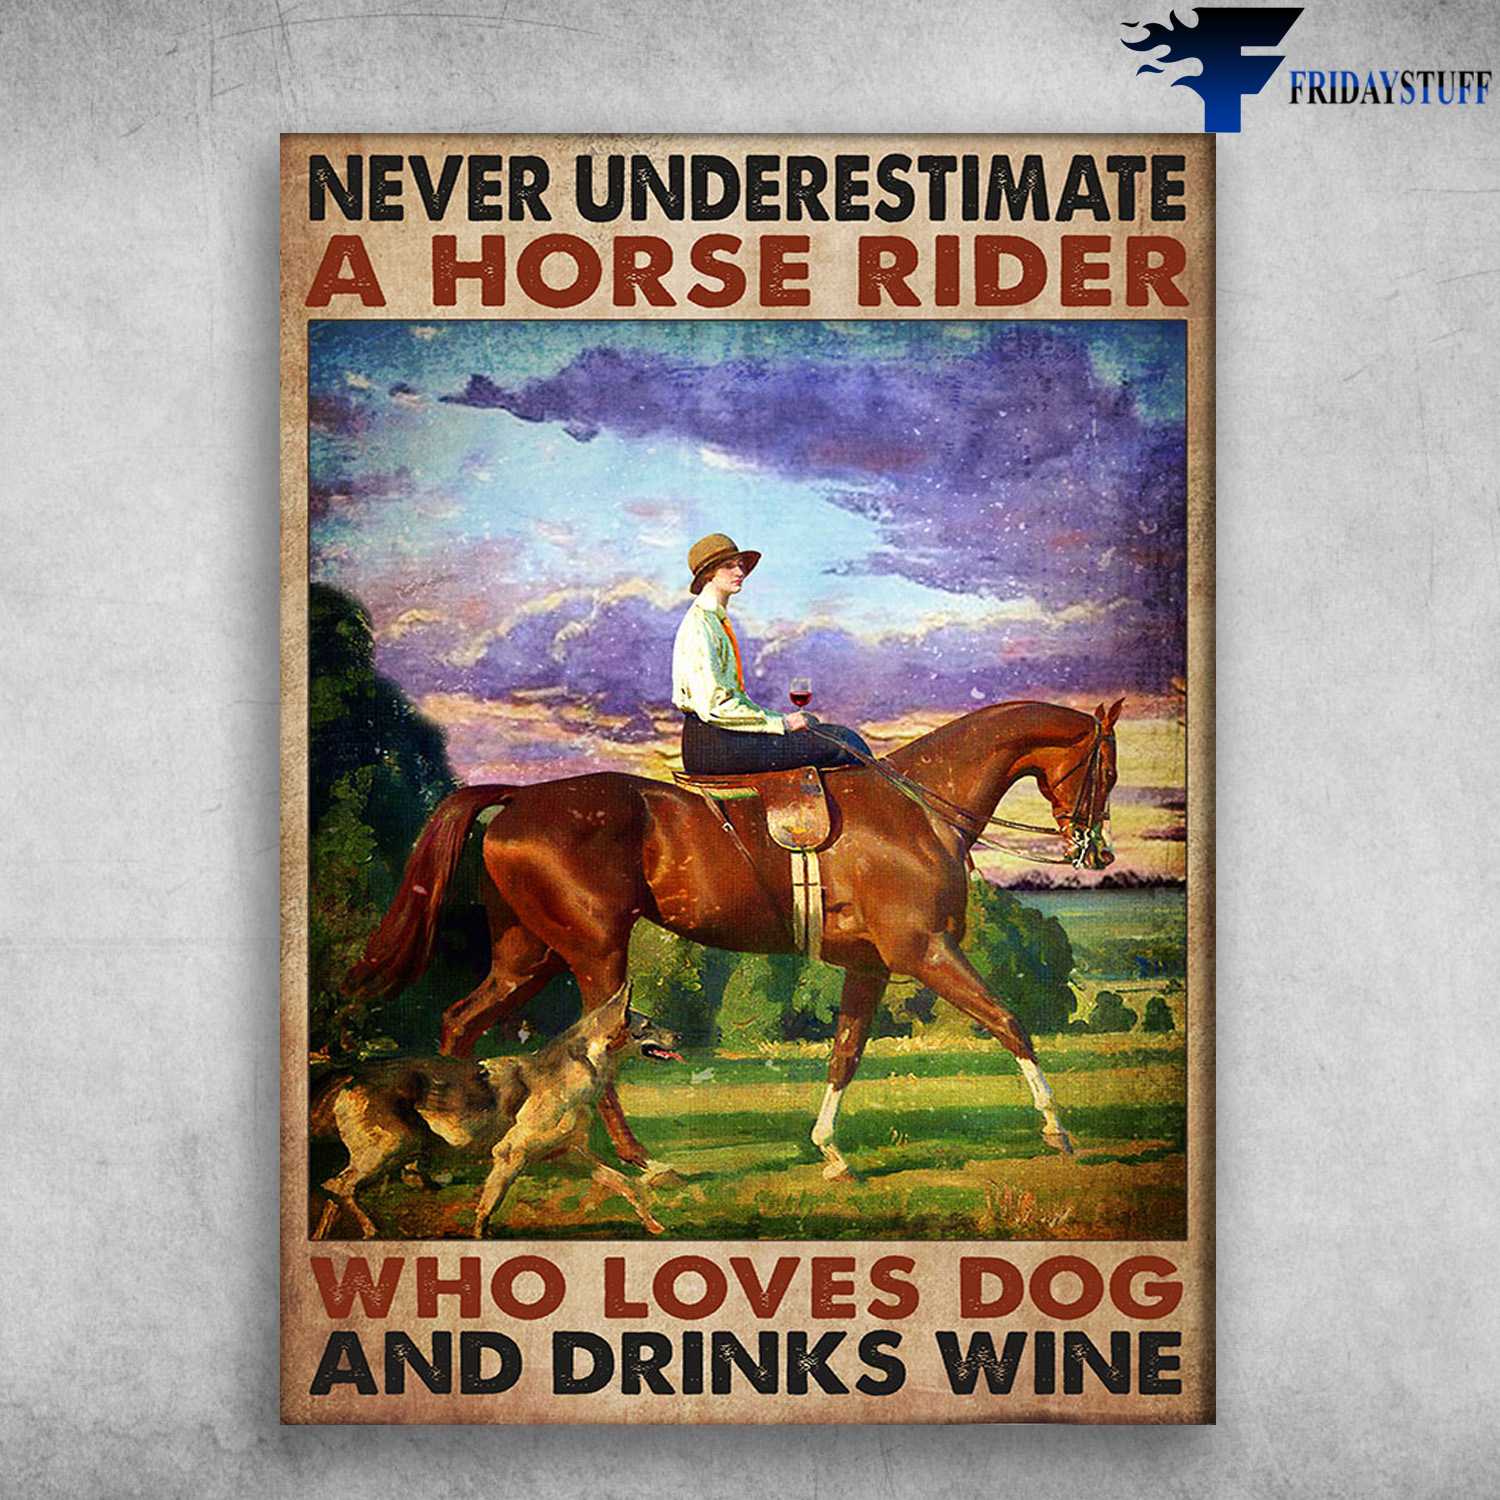 Horse Riding, Dog And Wine - Never Underestimate A Horse Rider, Who Loves Dog, And Drinks Wine